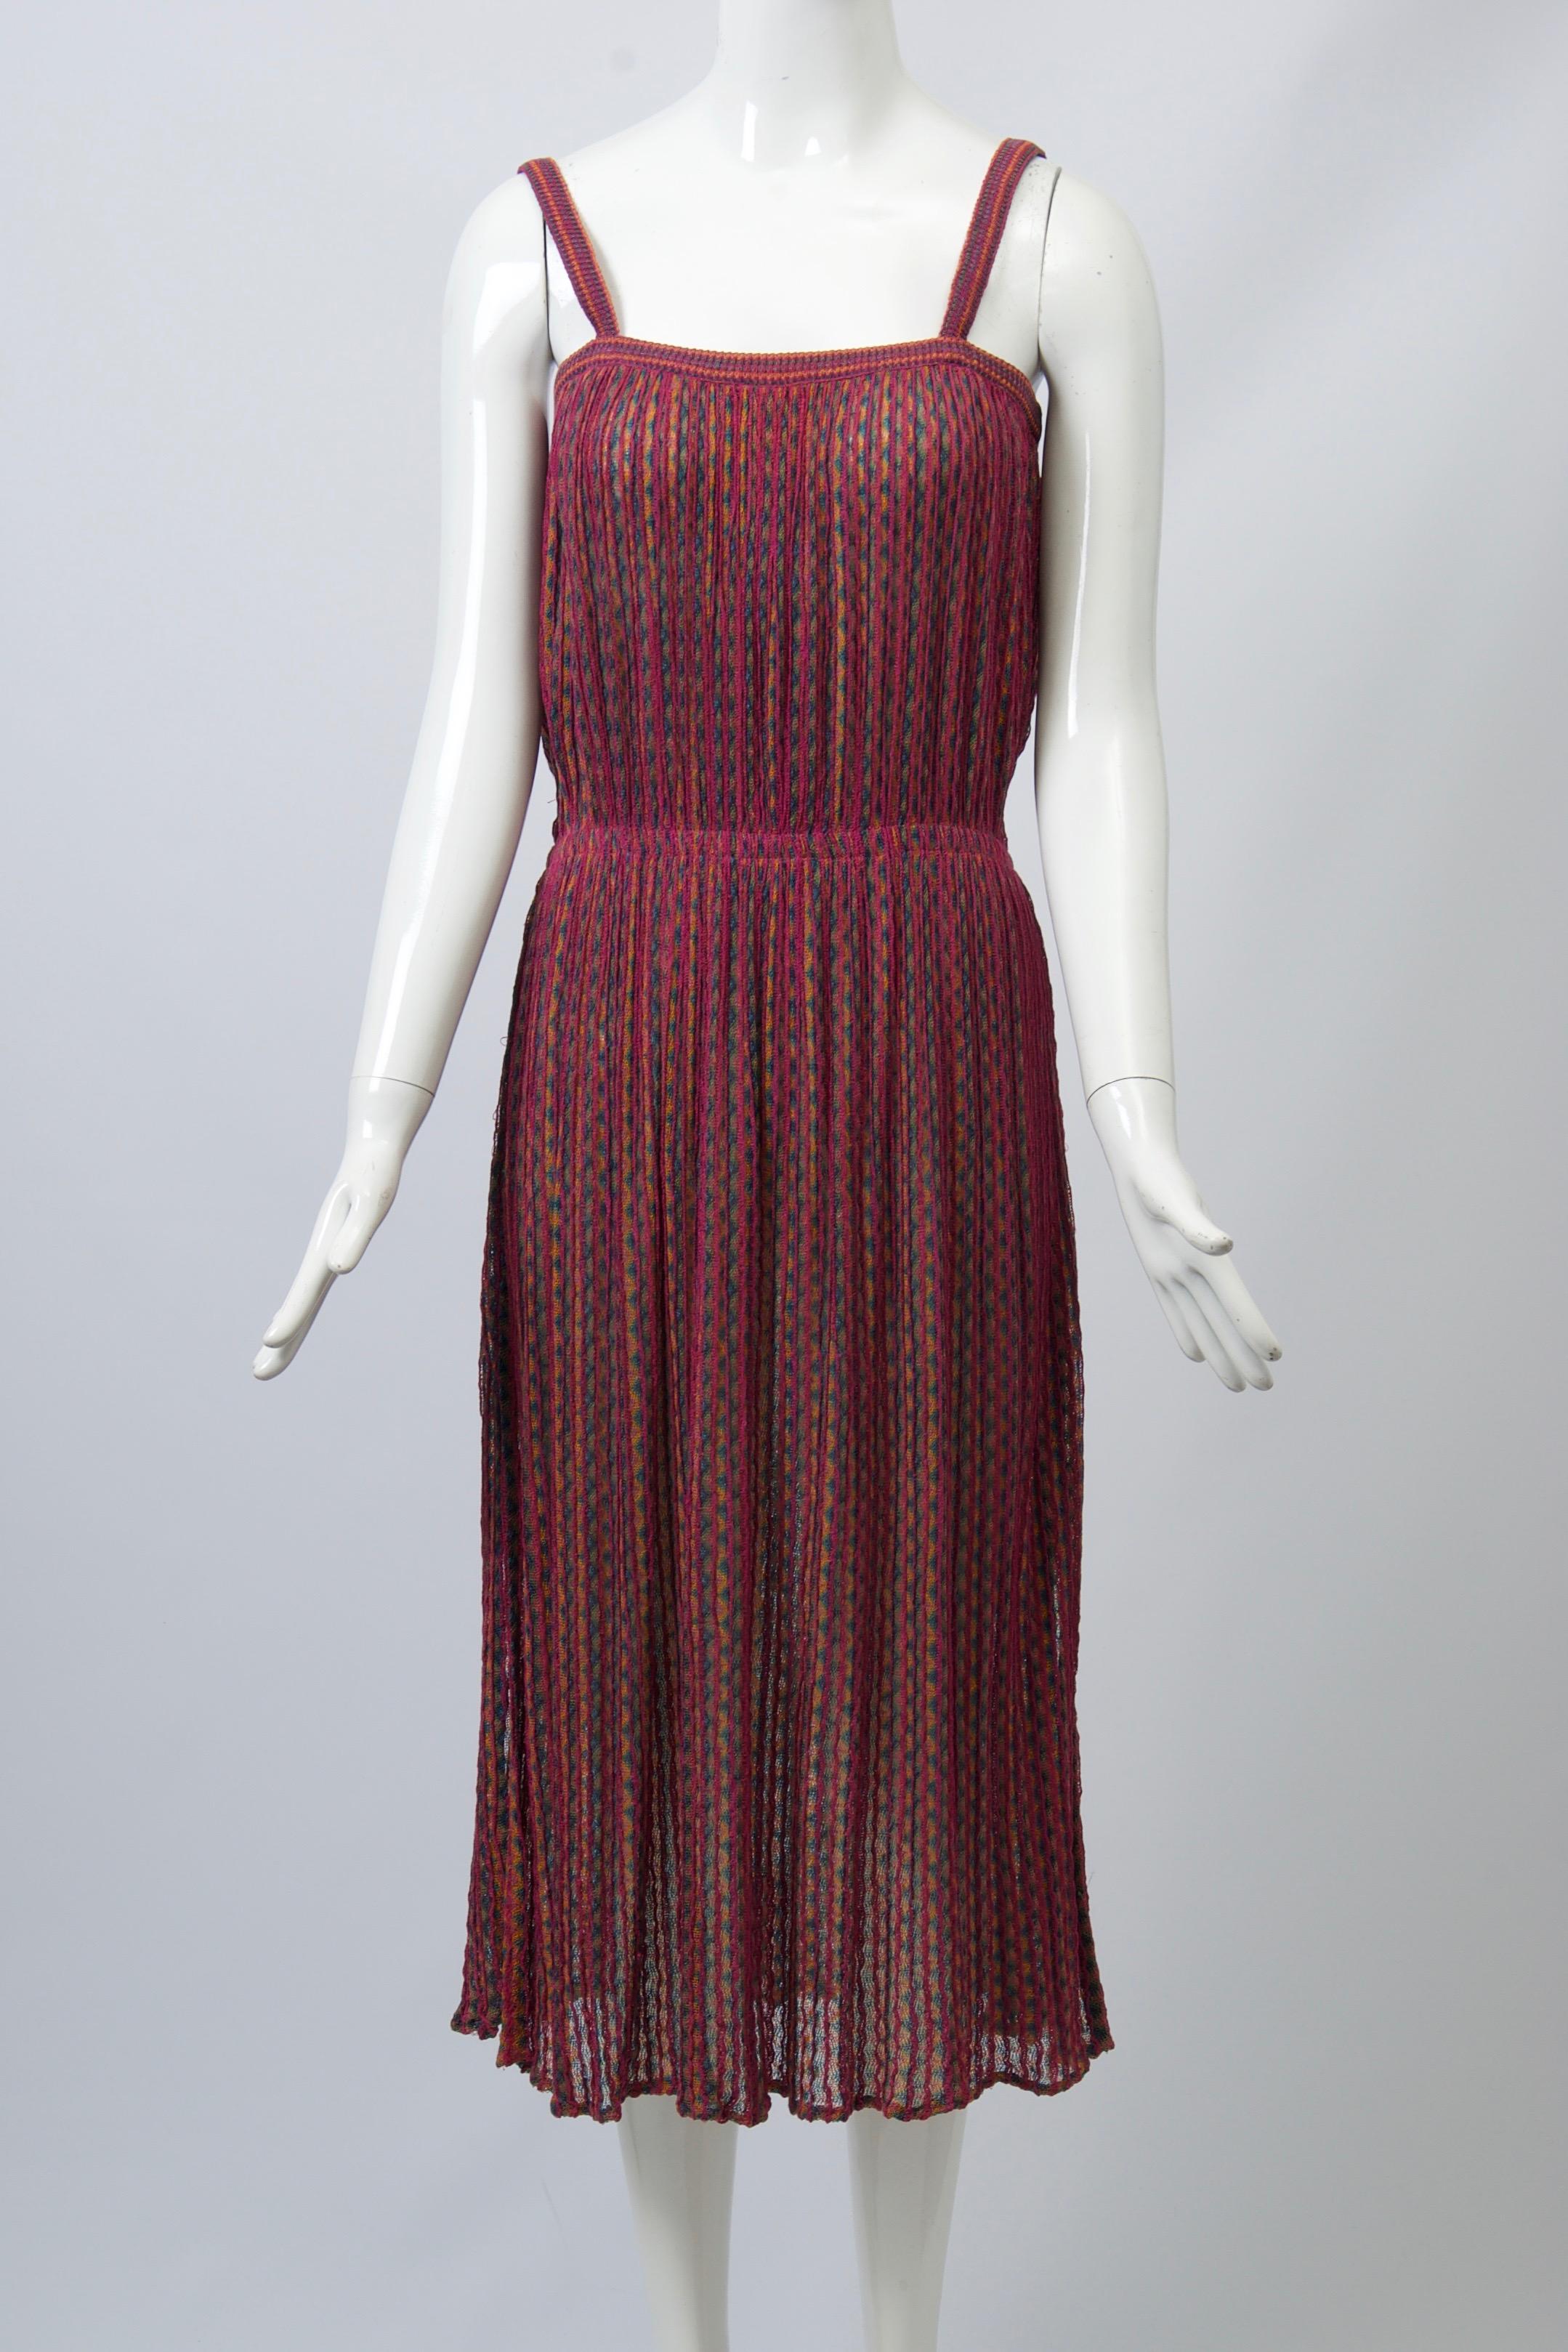 Missoni Raspberry Sundress In Good Condition For Sale In Alford, MA